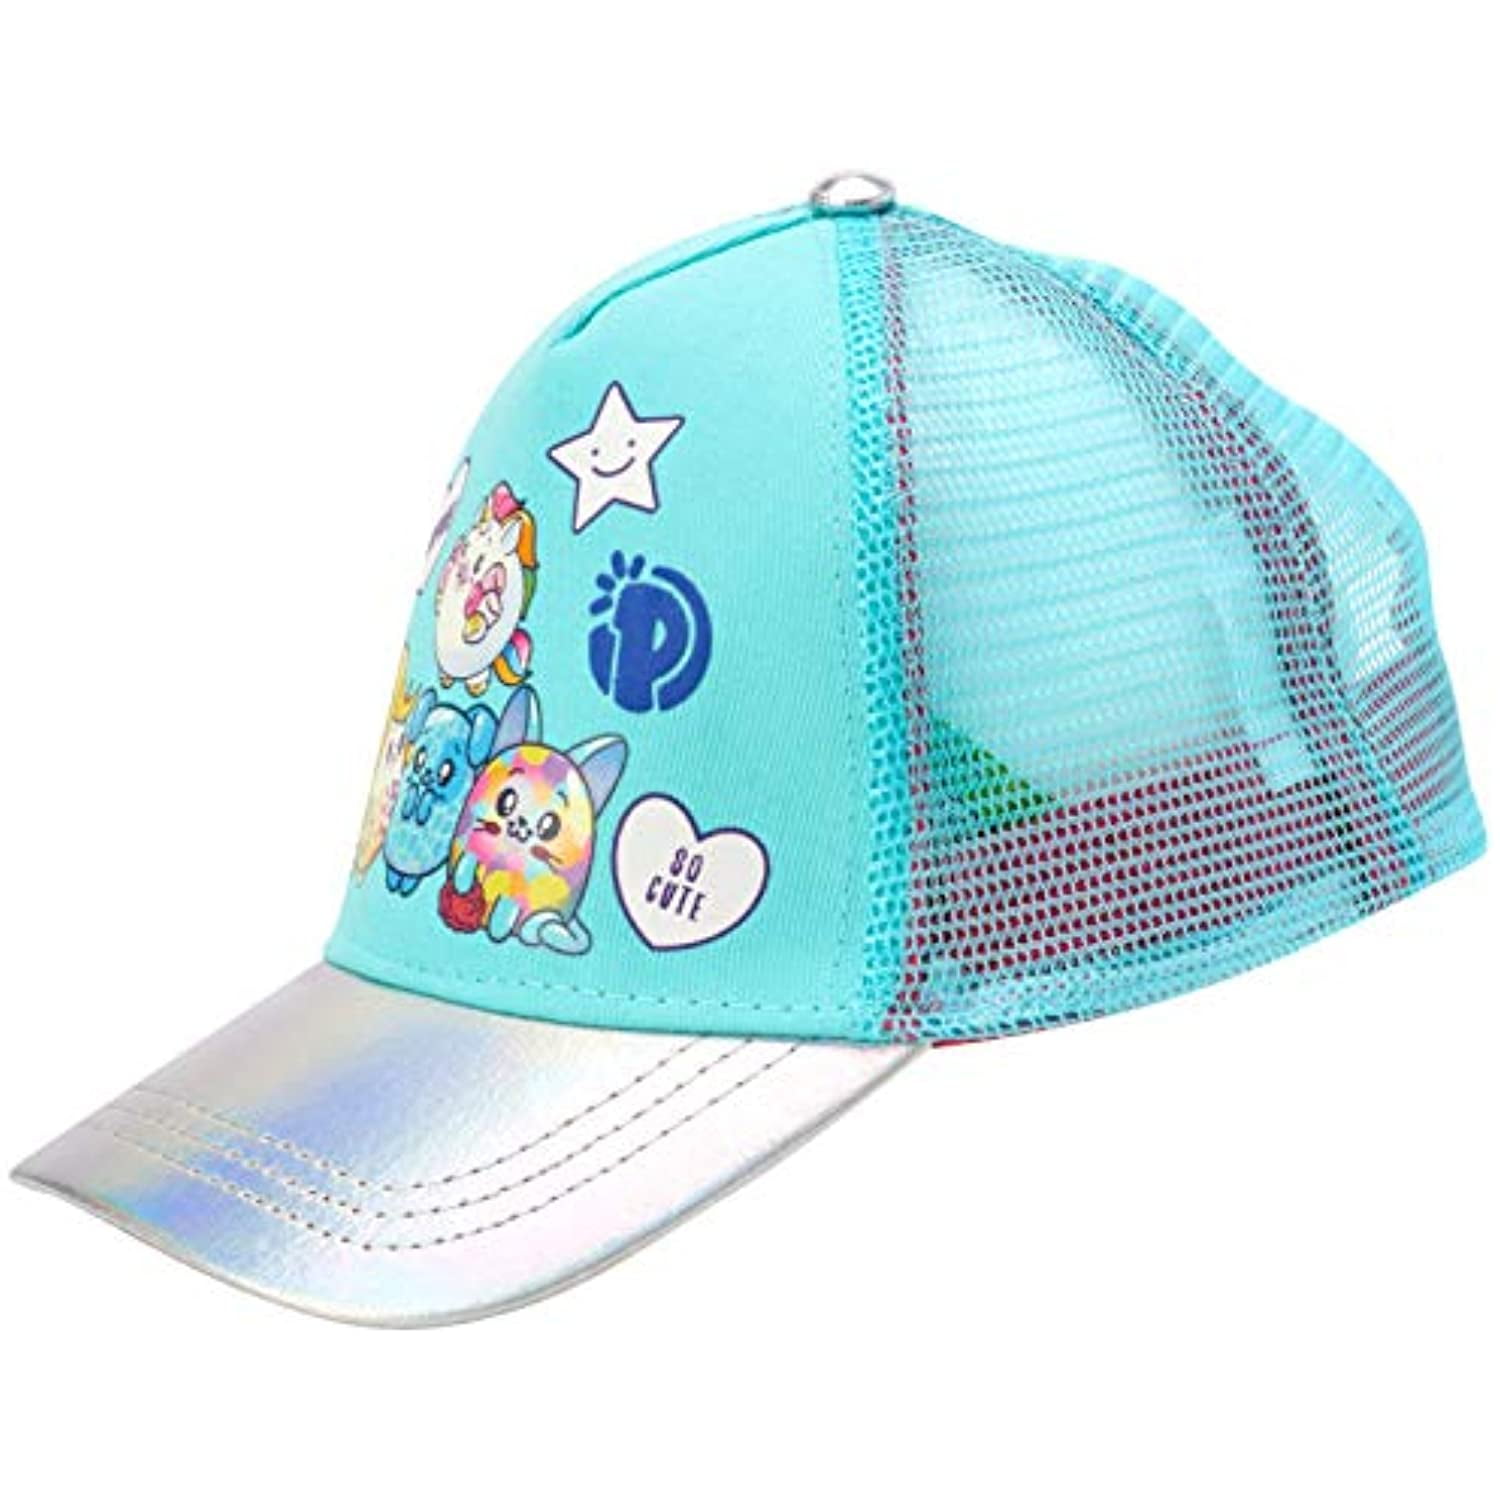 Fashions Work Hats Unisex Adjustable Breathable Ultra Soft Surgical Mickey Print